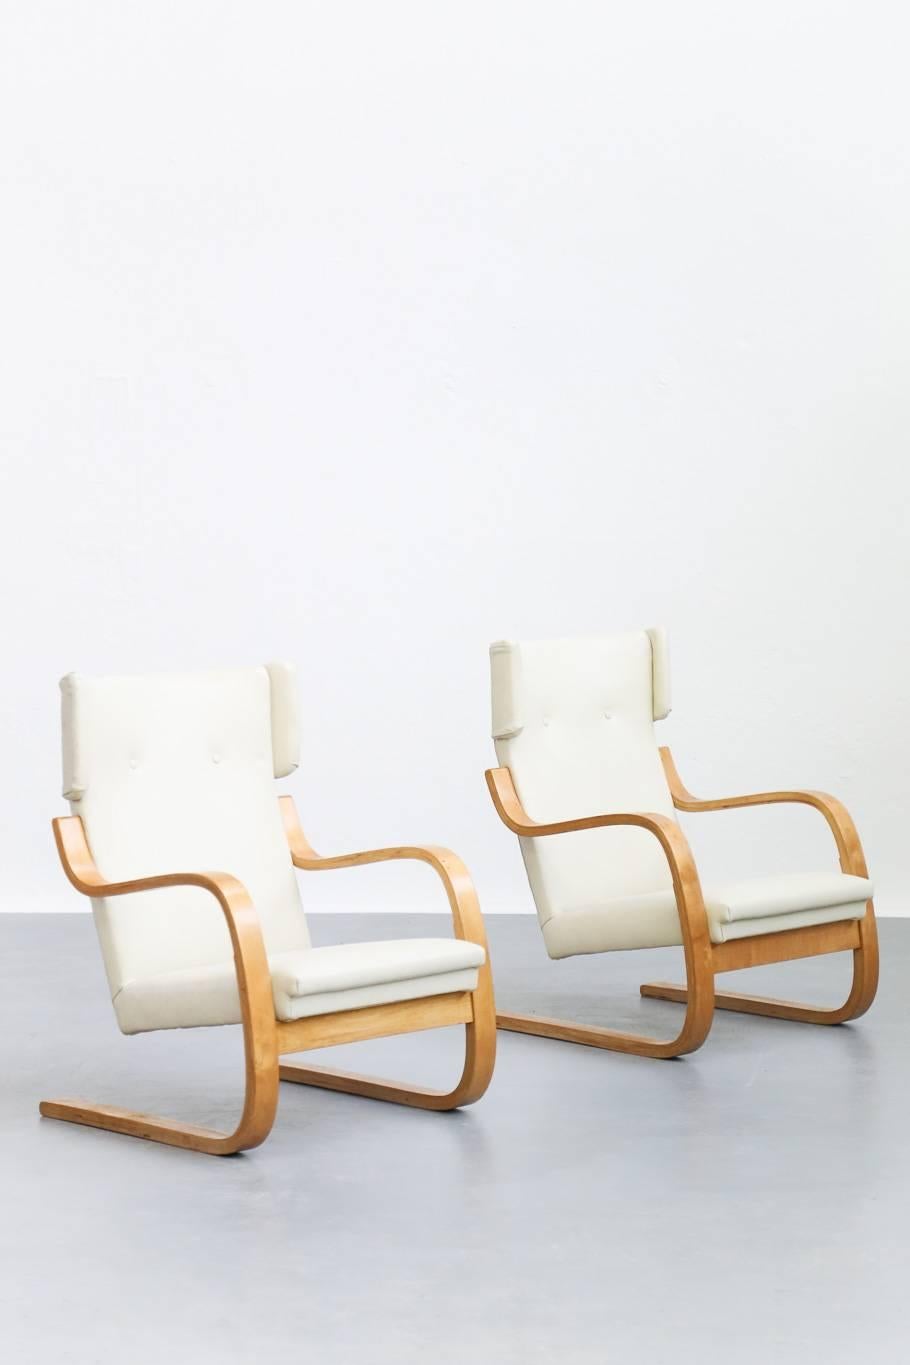 Pair of Lounge Chairs Model 401 by Alvar Aalto, 1935 Finland Design 1